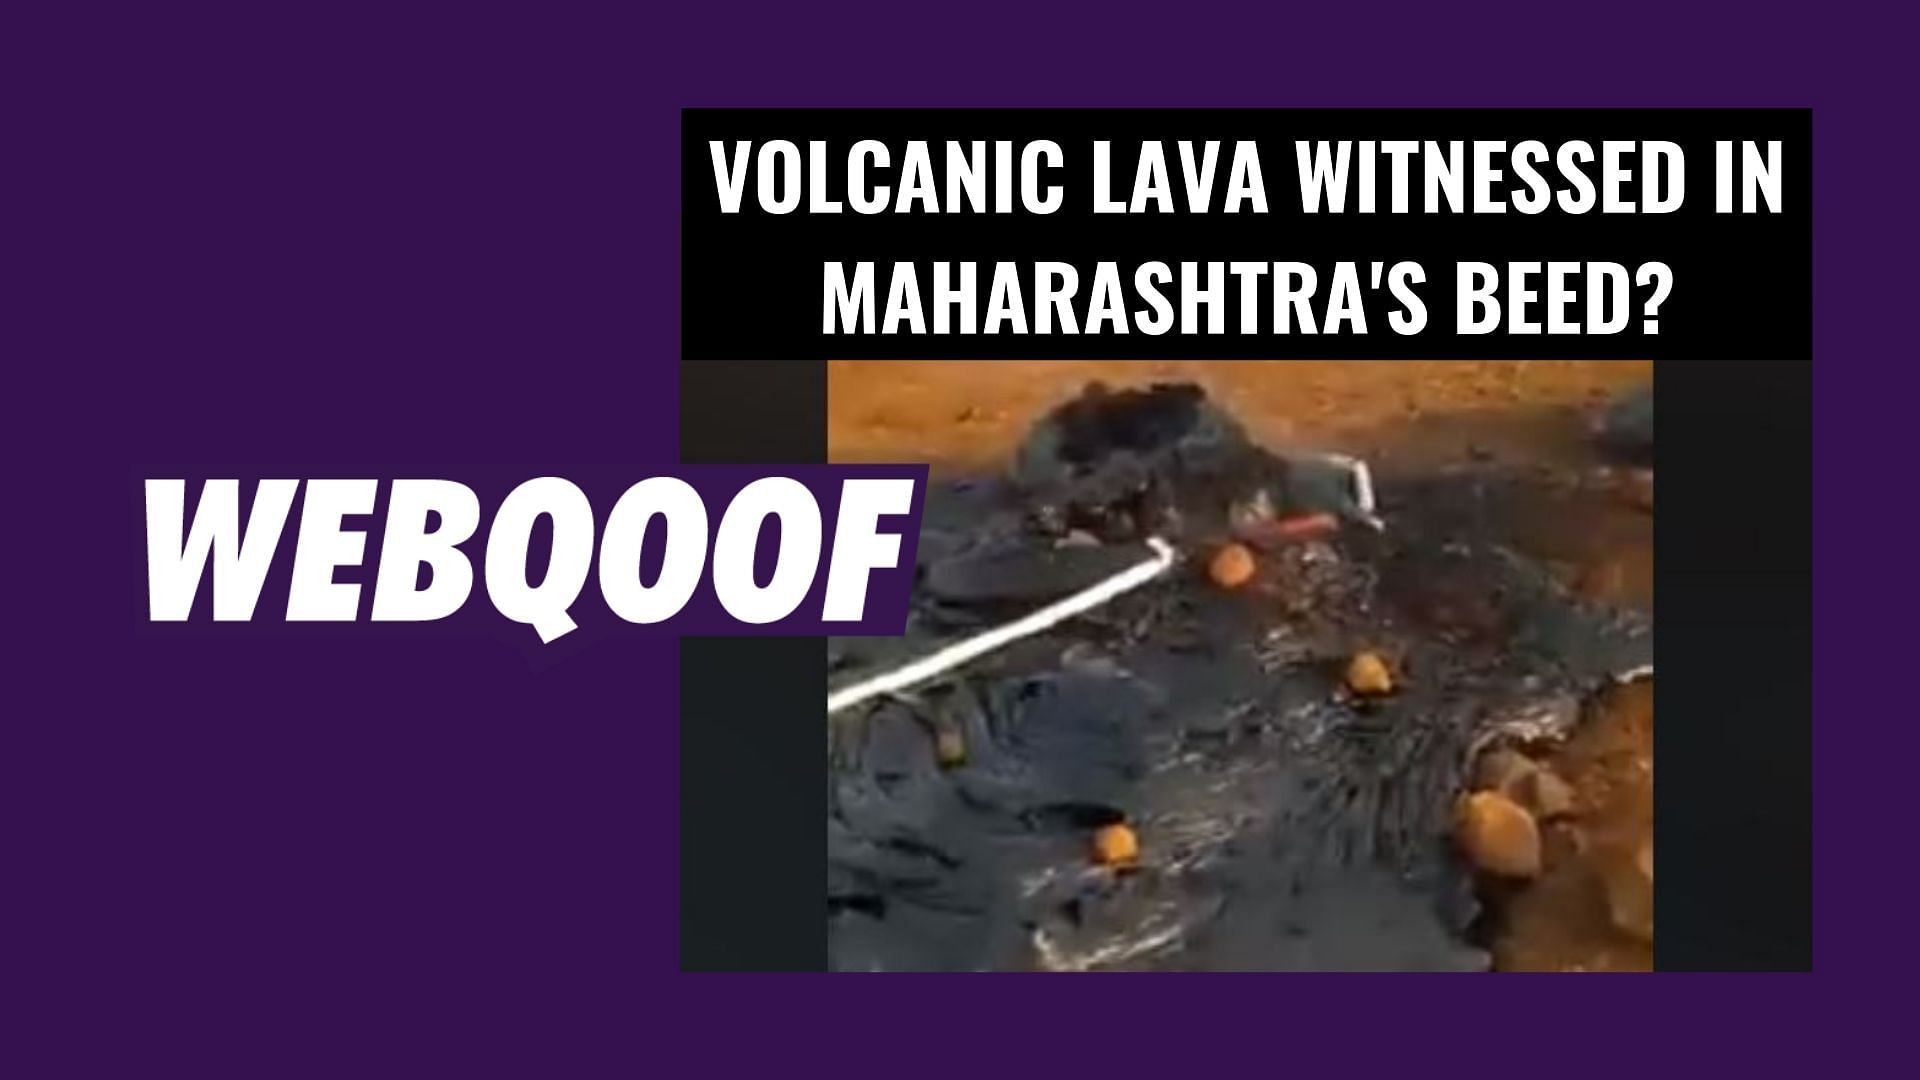 A viral video falsely claimed that Beed district in Maharashtra’s witnessed volcanic lava.